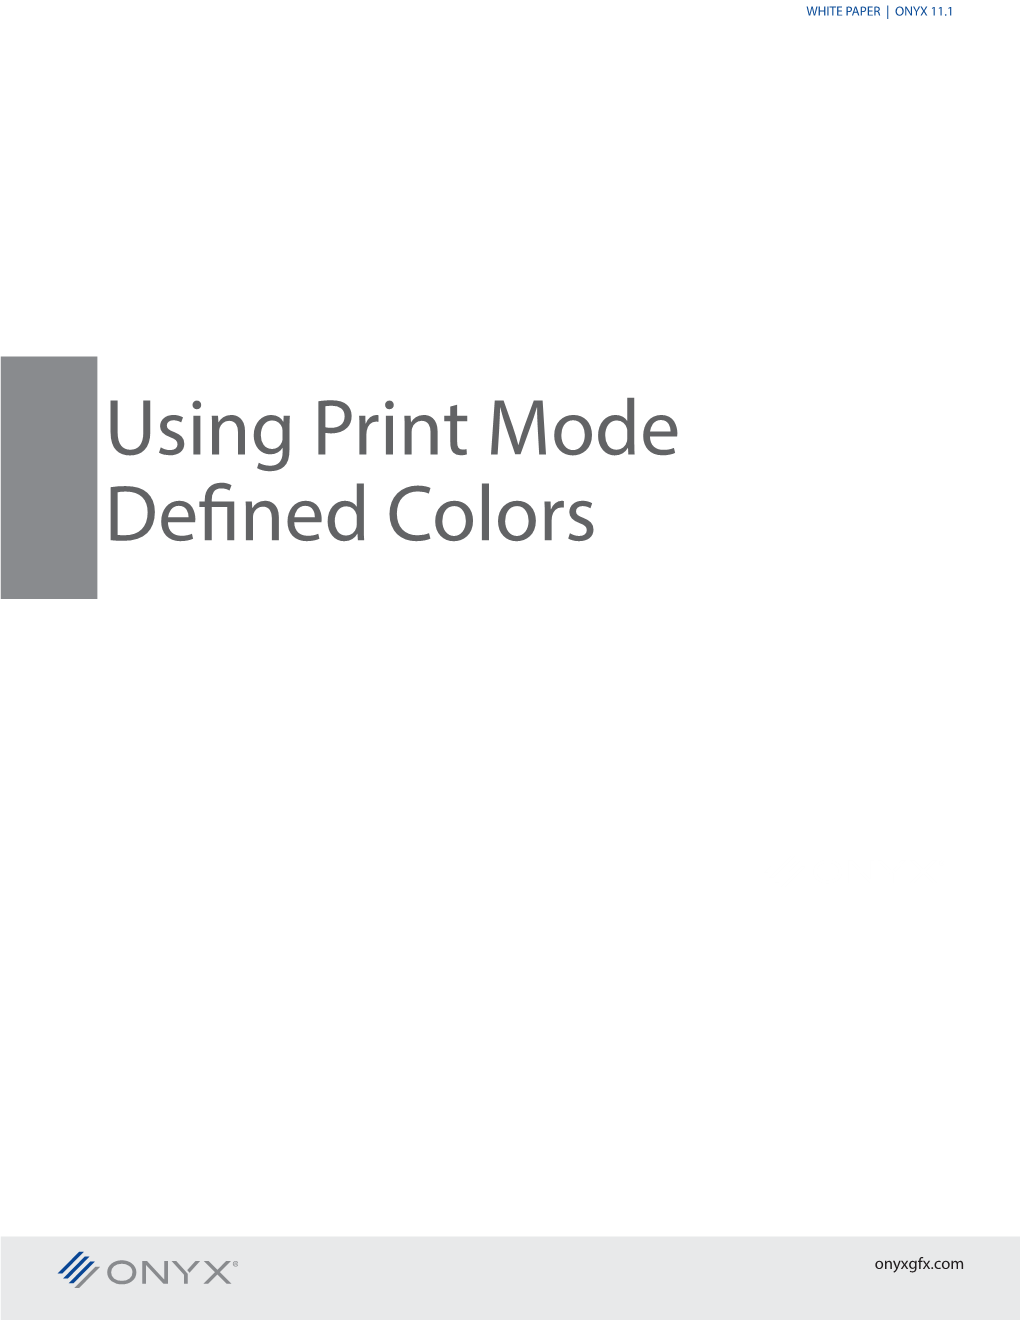 Using Print Mode Defined Colors